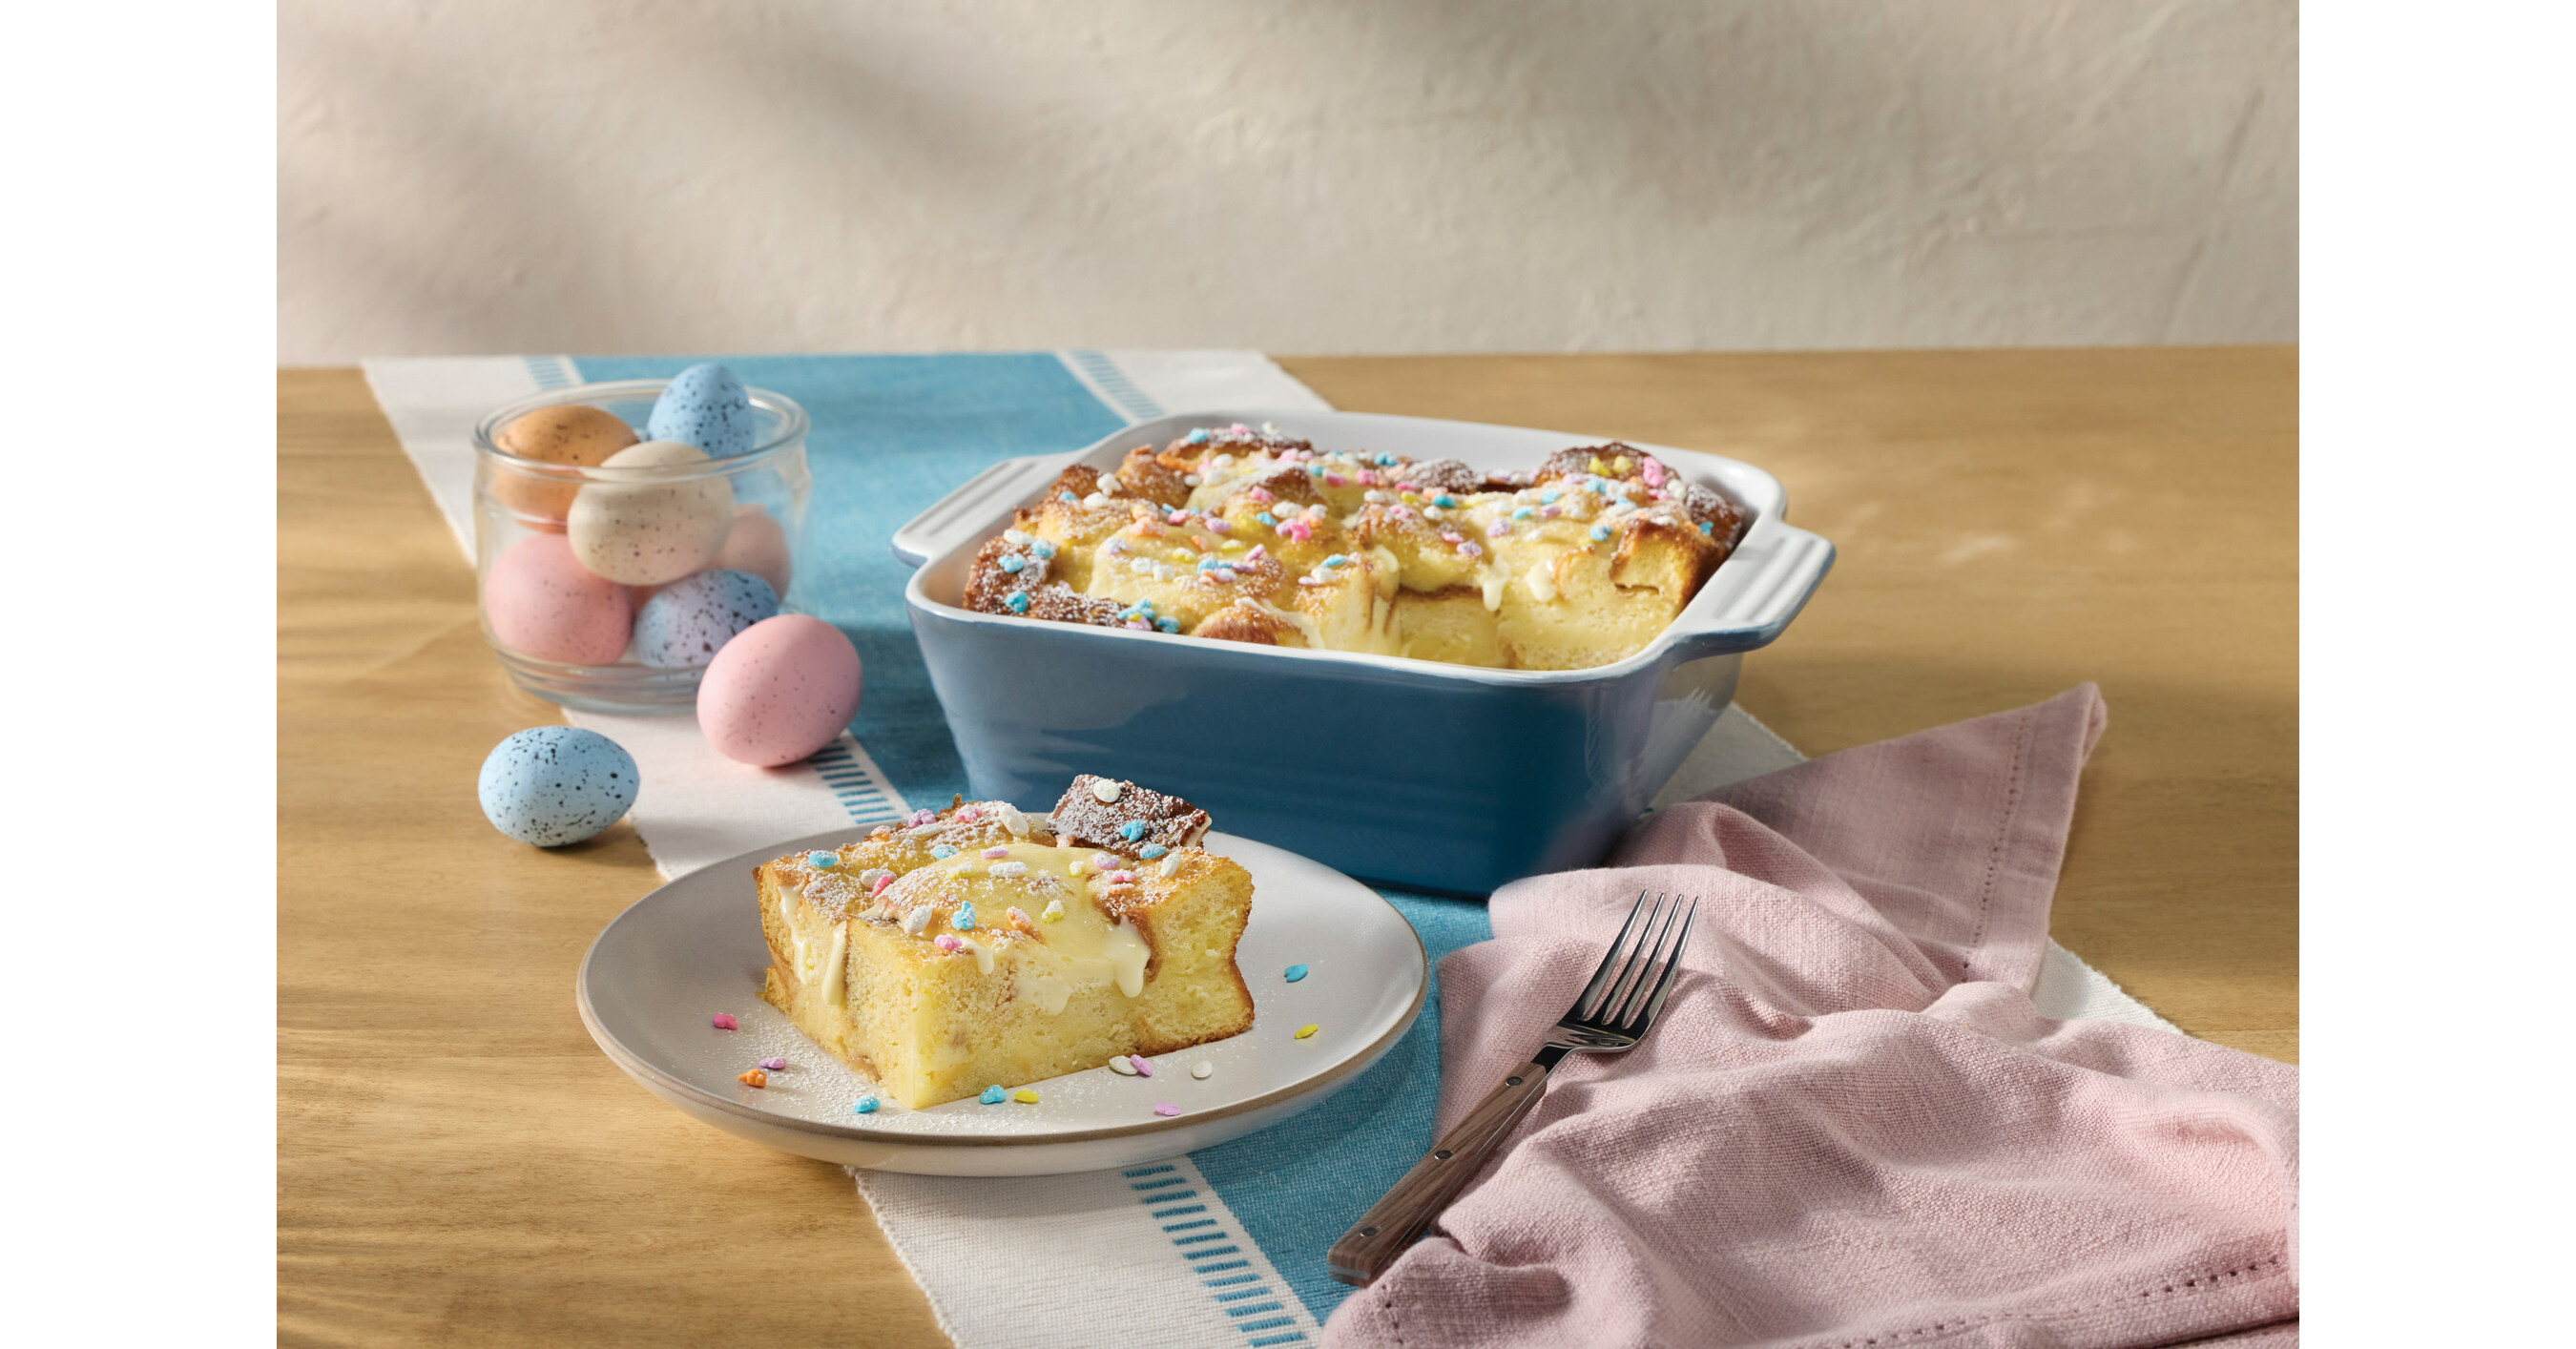 Cracker Barrel Old Country Store® Announces Return of Easter Heat n